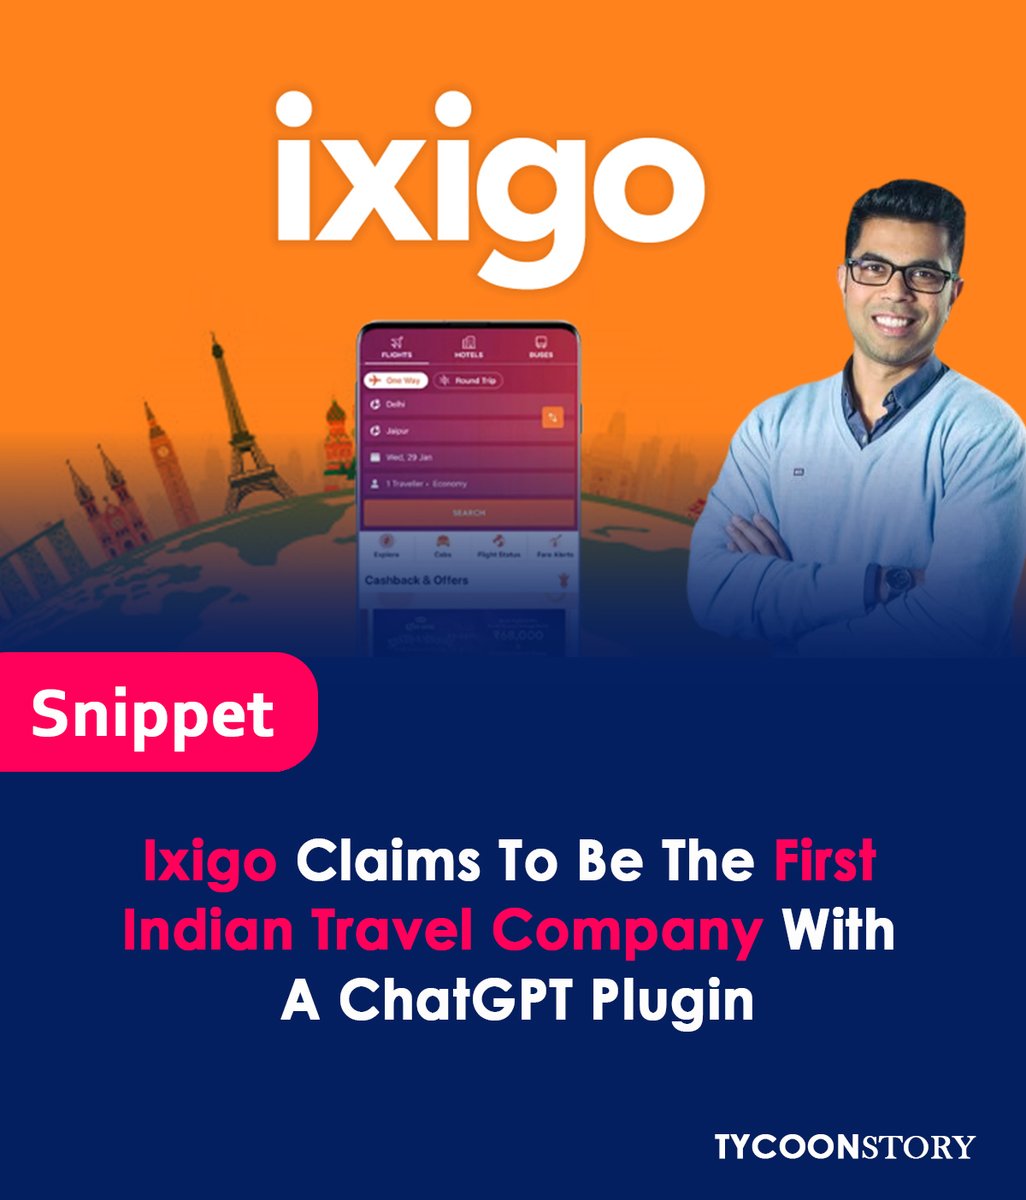 ixigo claims to be the first Indian travel company with a ChatGPT plugin

#traveltechnology #smarttravel #travelbooking #tripplanning #travelutility #travelinnovation #TripManagement #TopTravelApps #travelcompany #trip @ixigo @OpenAI